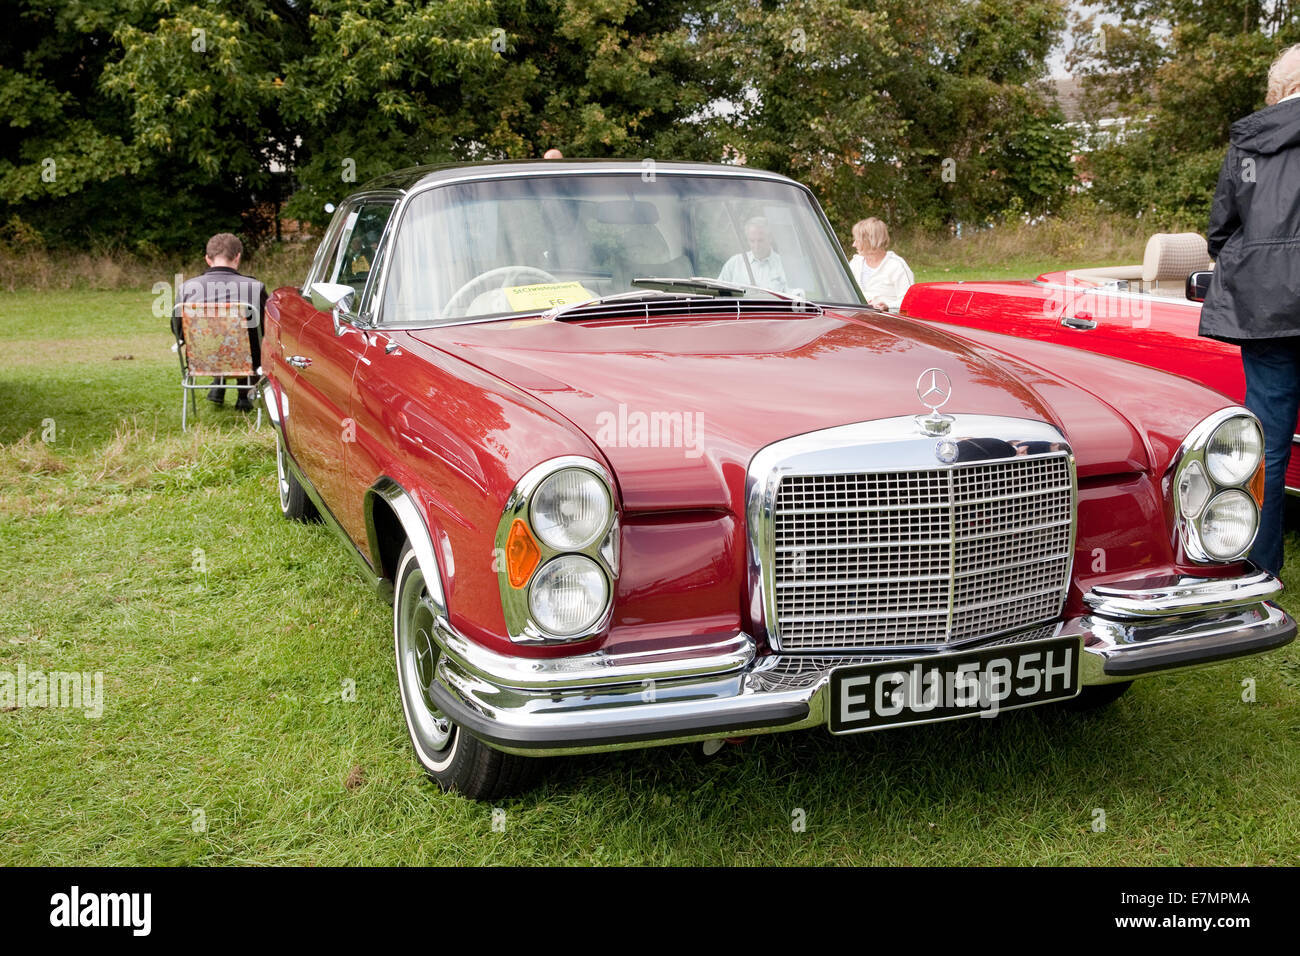 Mercedes 280 SE 3499CC COUPE at the St Christopher's Hospice Classic Car Show which took place in Orpington, Kent Stock Photo